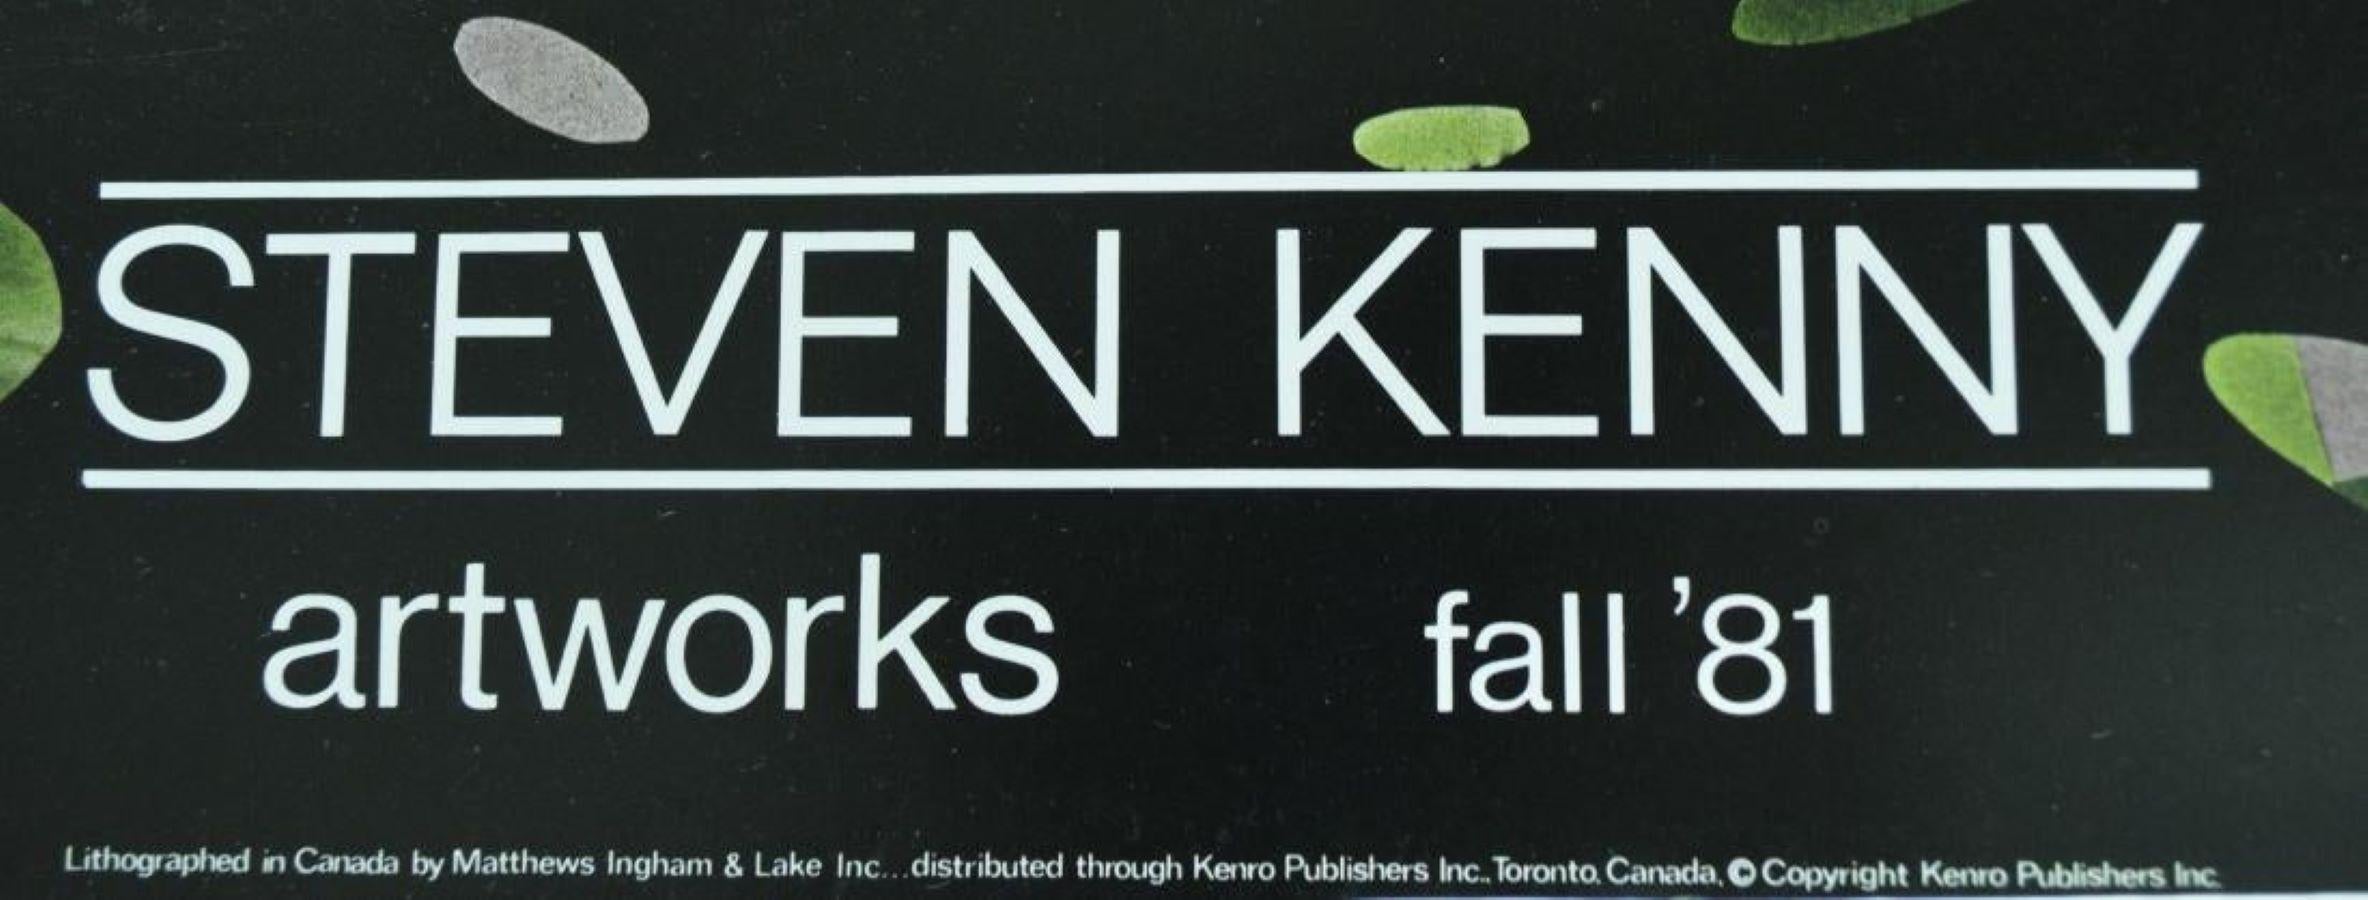 Poster-Artworks Fall ’81. Distributed through Kenro Publishers, Toronto - Print by Steven Kenny